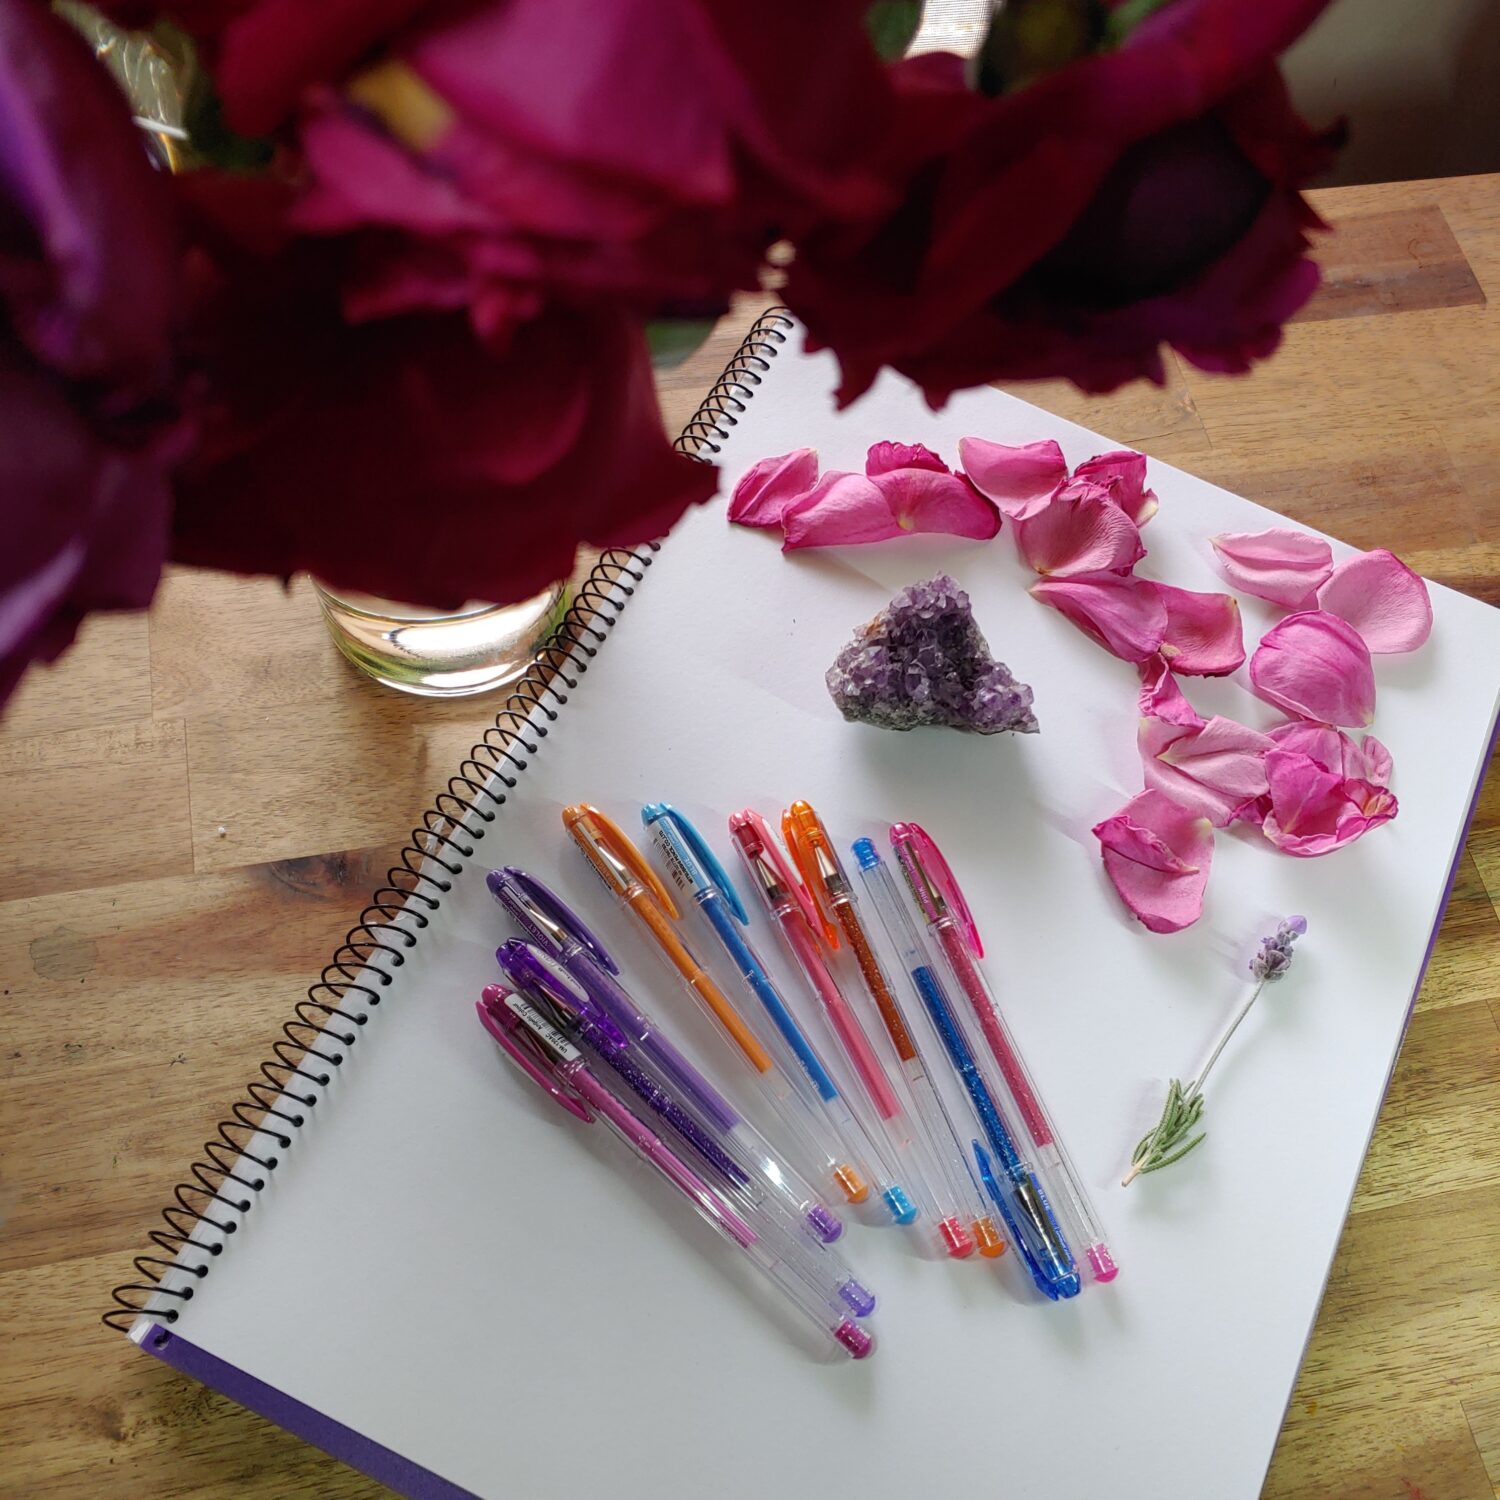 Journal with pens, rose petals and crystals